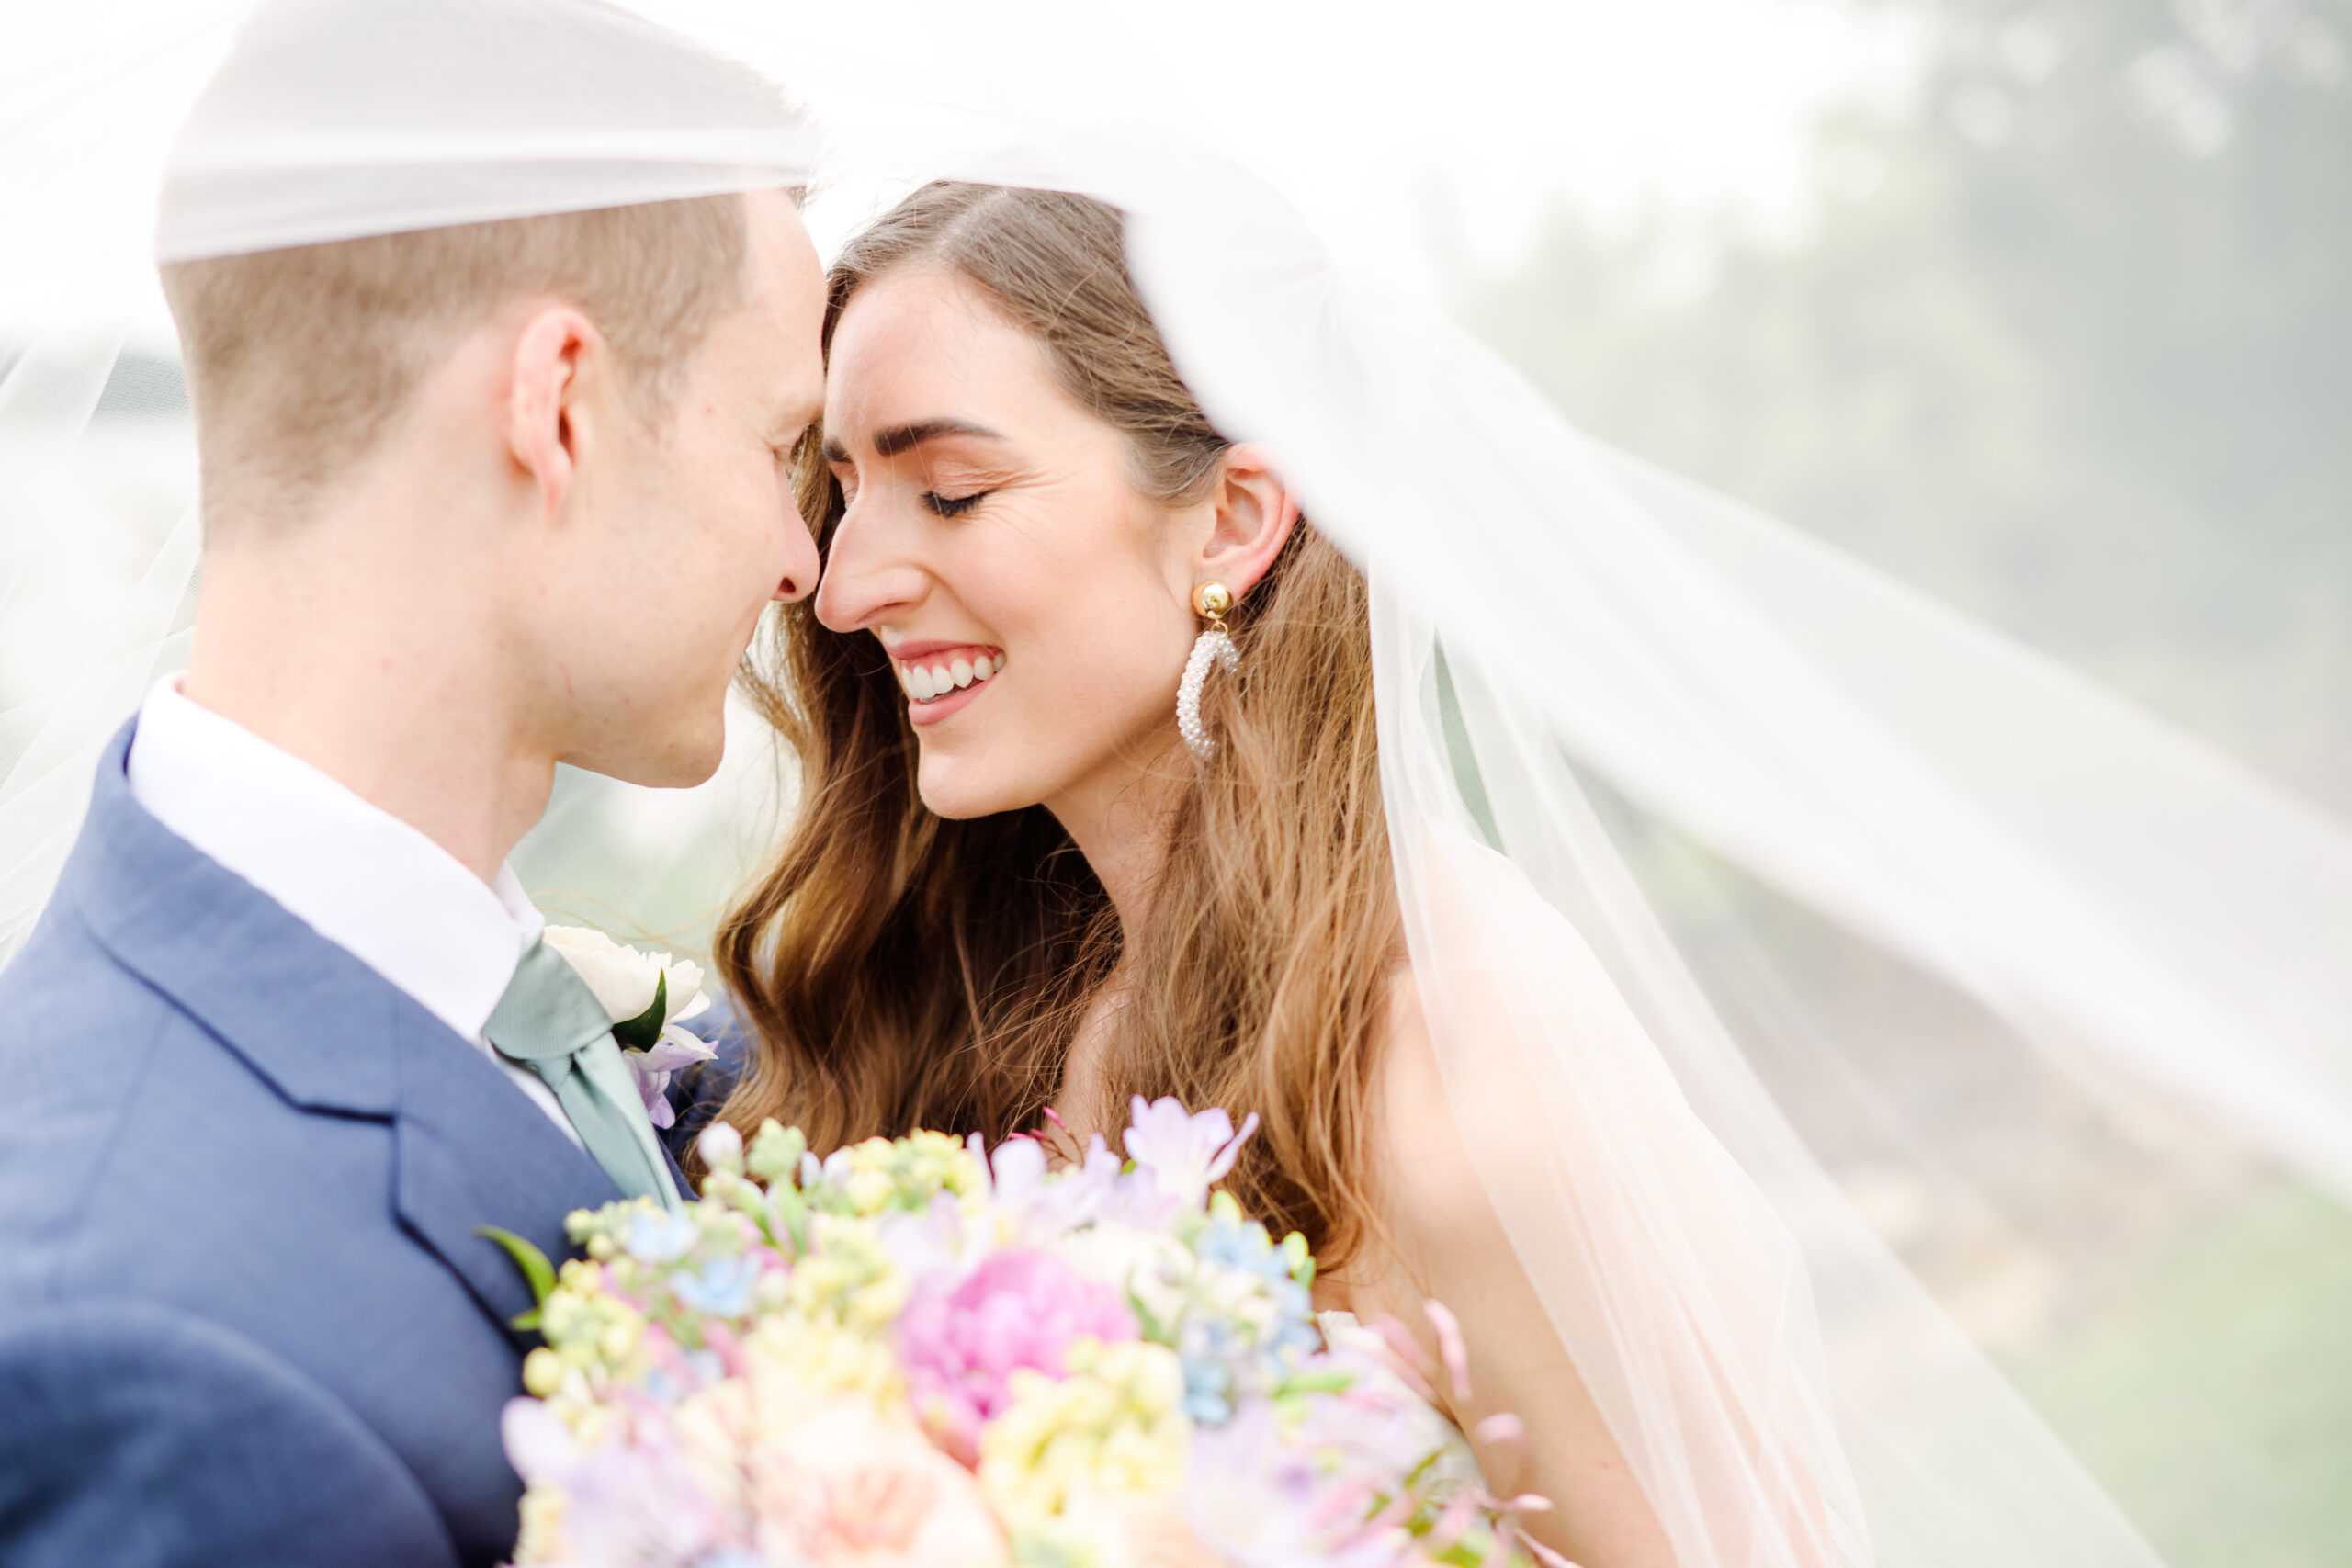 The image shows a close-up of a bride and groom on their wedding day. They are facing each other with their foreheads nearly touching, both smiling happily. The bride is wearing a white veil and has long brown hair. She's also wearing dangling earrings. The groom is wearing a blue suit with a white shirt and a light-colored tie. He has a boutonnière pinned to his lapel. In the foreground, there's a colorful bouquet of flowers, including pink, blue, and yellow blooms. The background is soft and out of focus, giving the image a dreamy, romantic quality. The photo captures an intimate moment between the newlyweds, conveying joy and love on their special day.